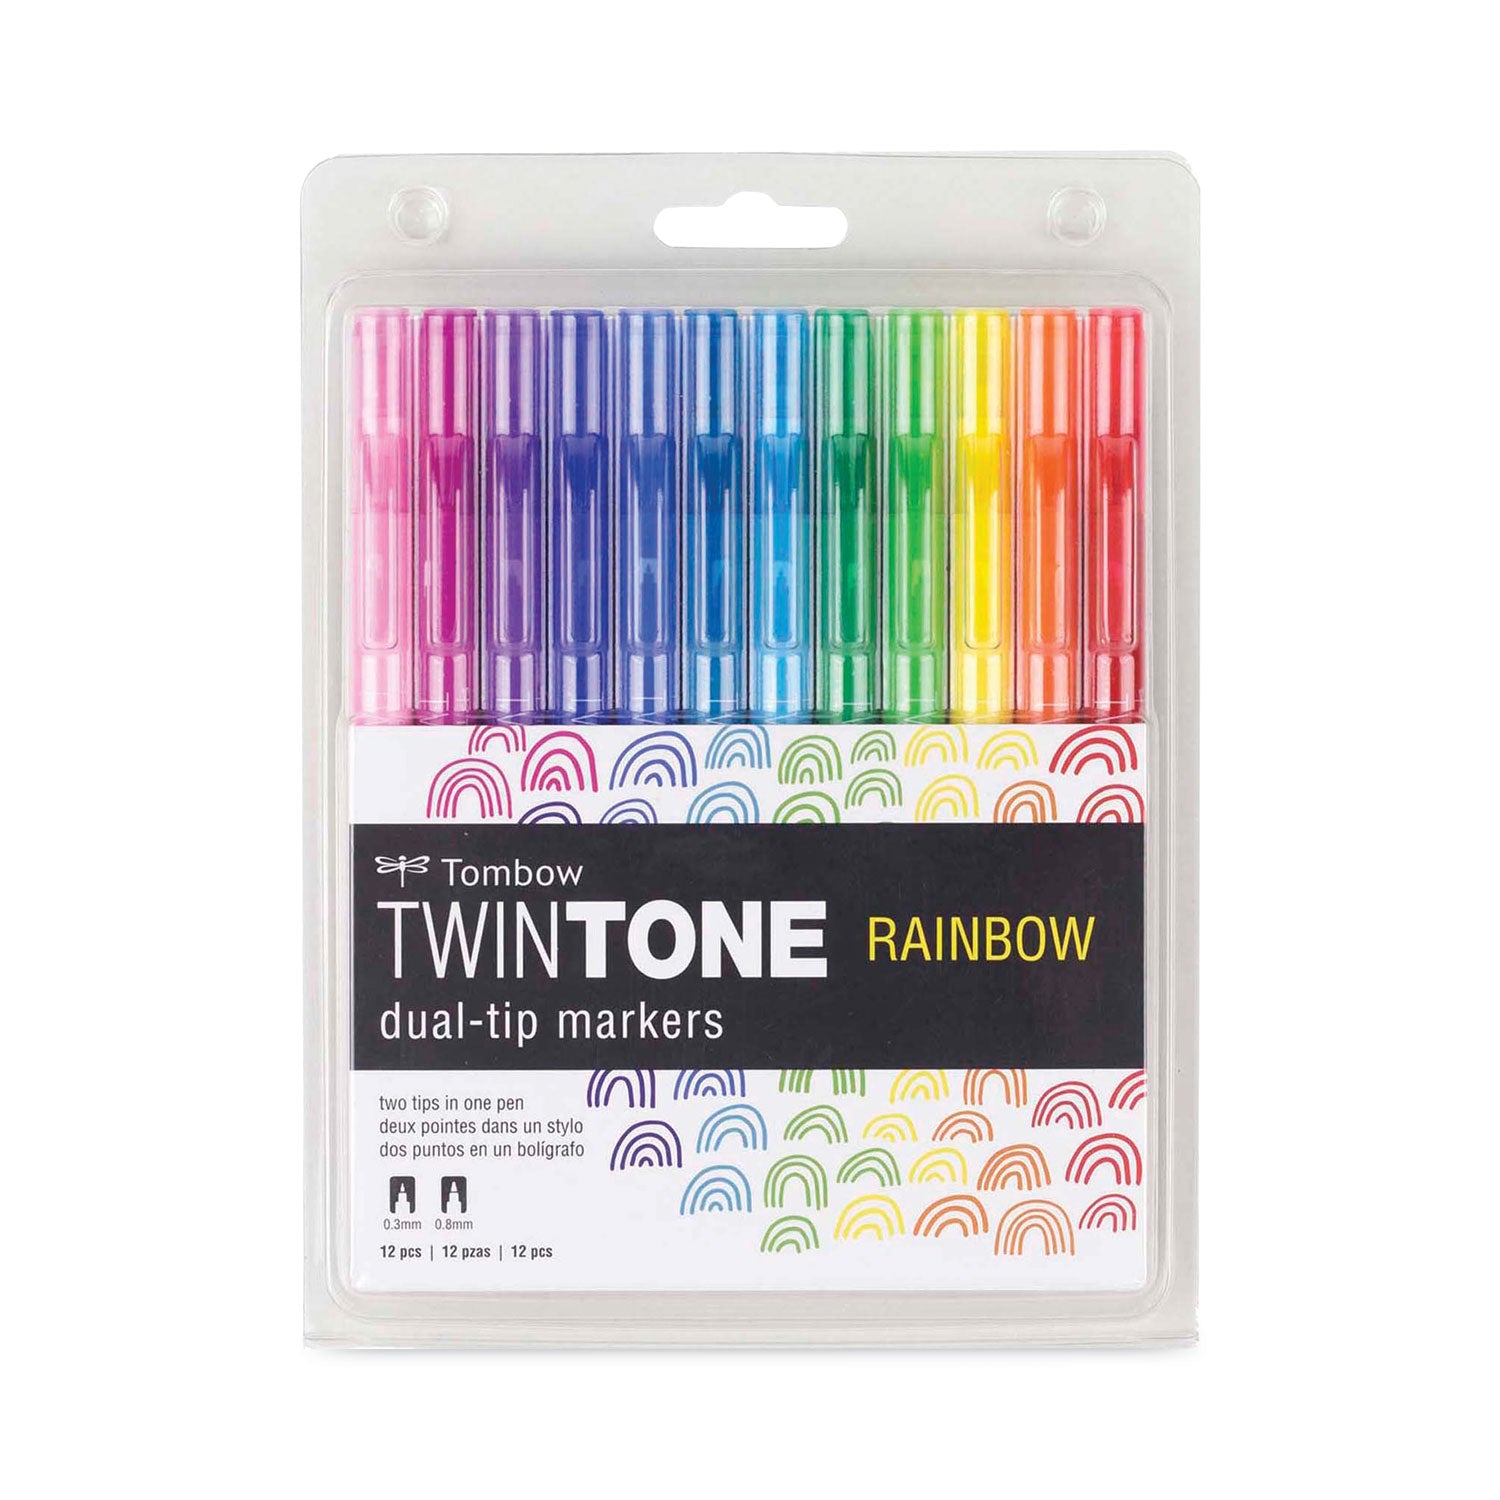 twintone-dual-tip-markers-extra-fine-broad-tips-assorted-colors-dozen_tom61526 - 1